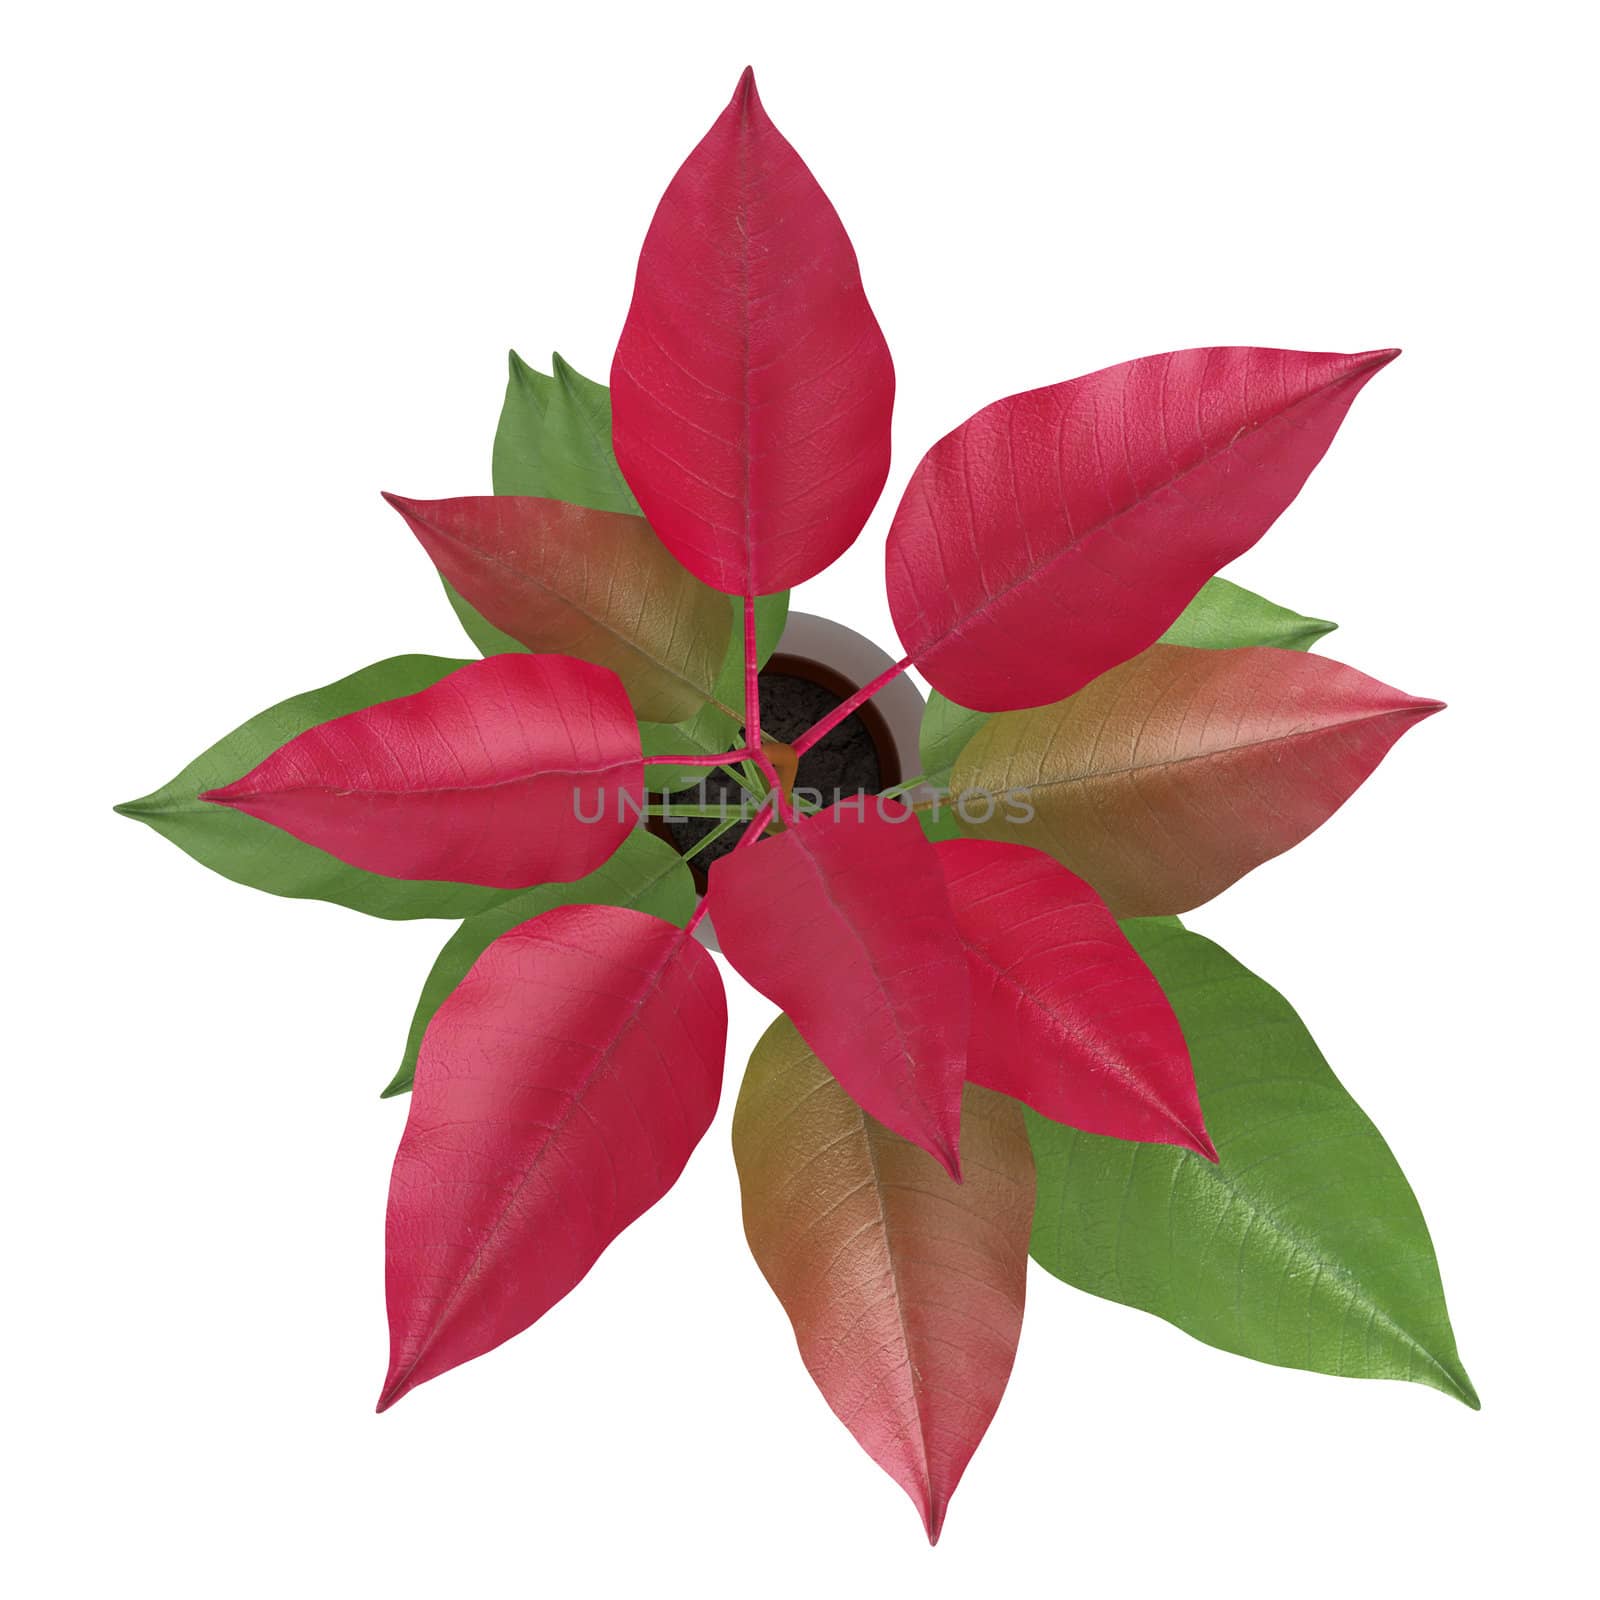 Home plant with green and red leaves isolated on white background